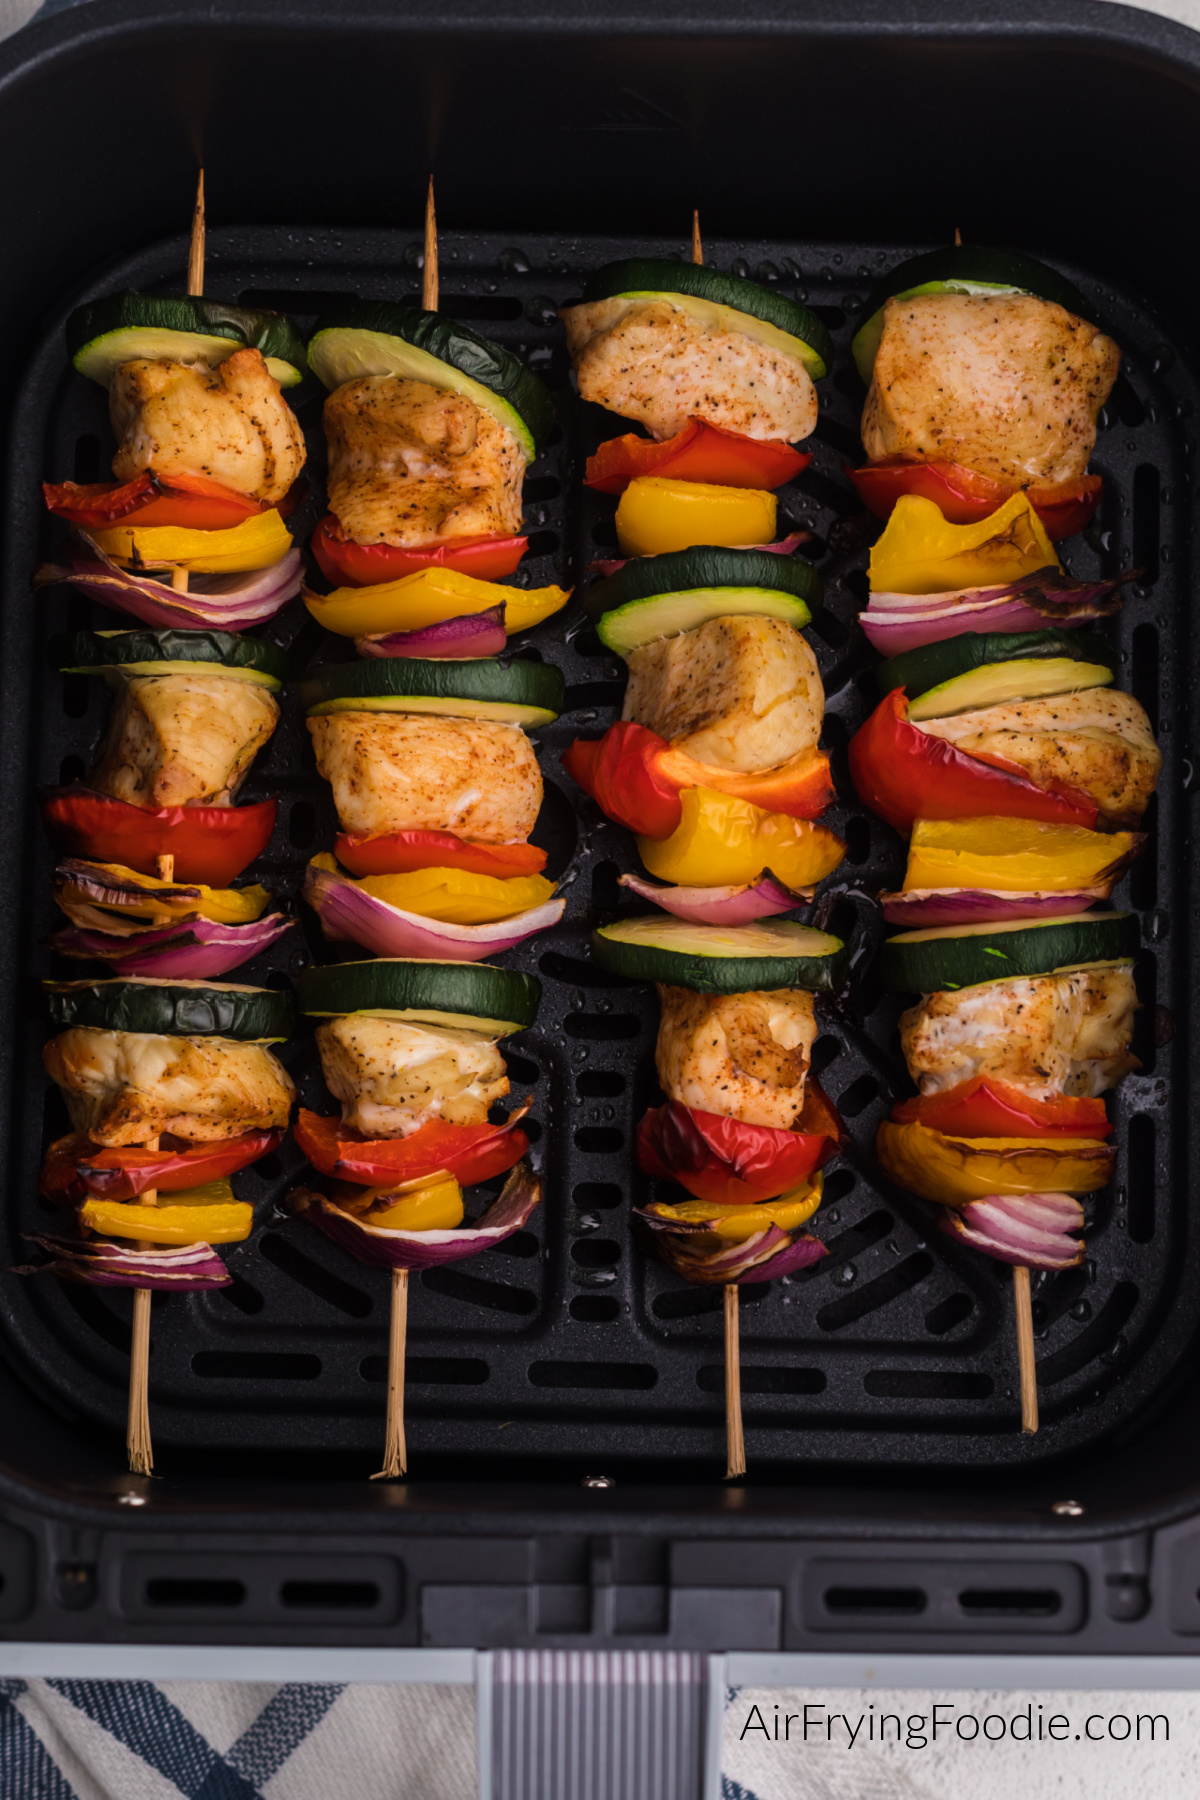 Chicken kabobs in the basket of the air fryer ready to serve.